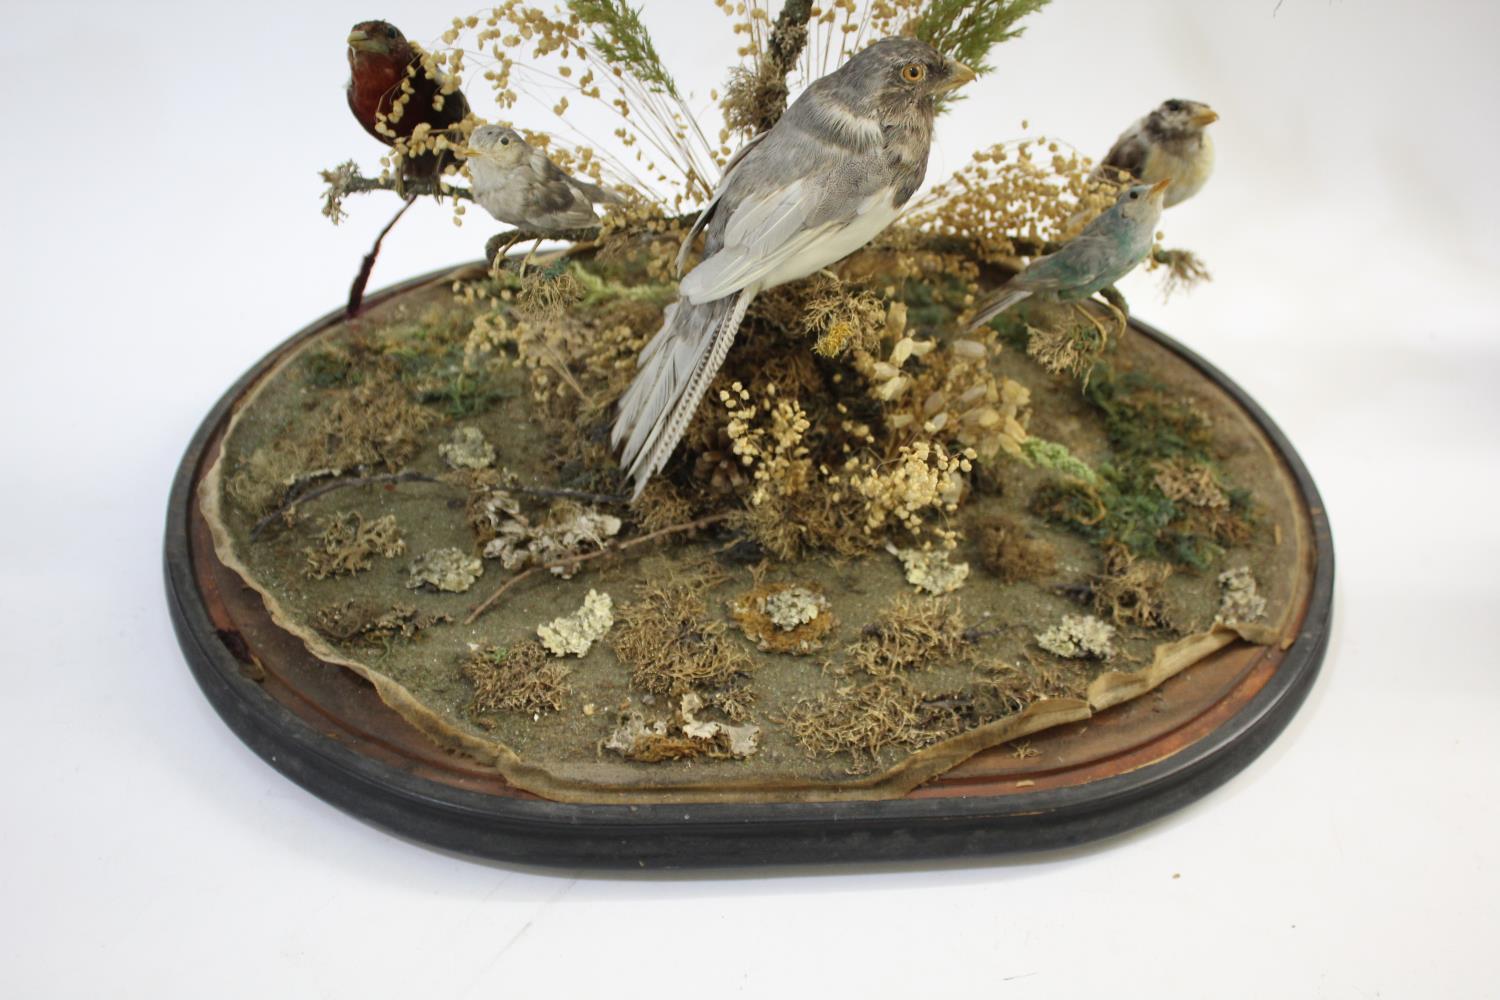 VICTORIAN CASED BIRDS & GLASS DOME - DIORAMA a large display of exotic stuffed birds including - Image 10 of 10